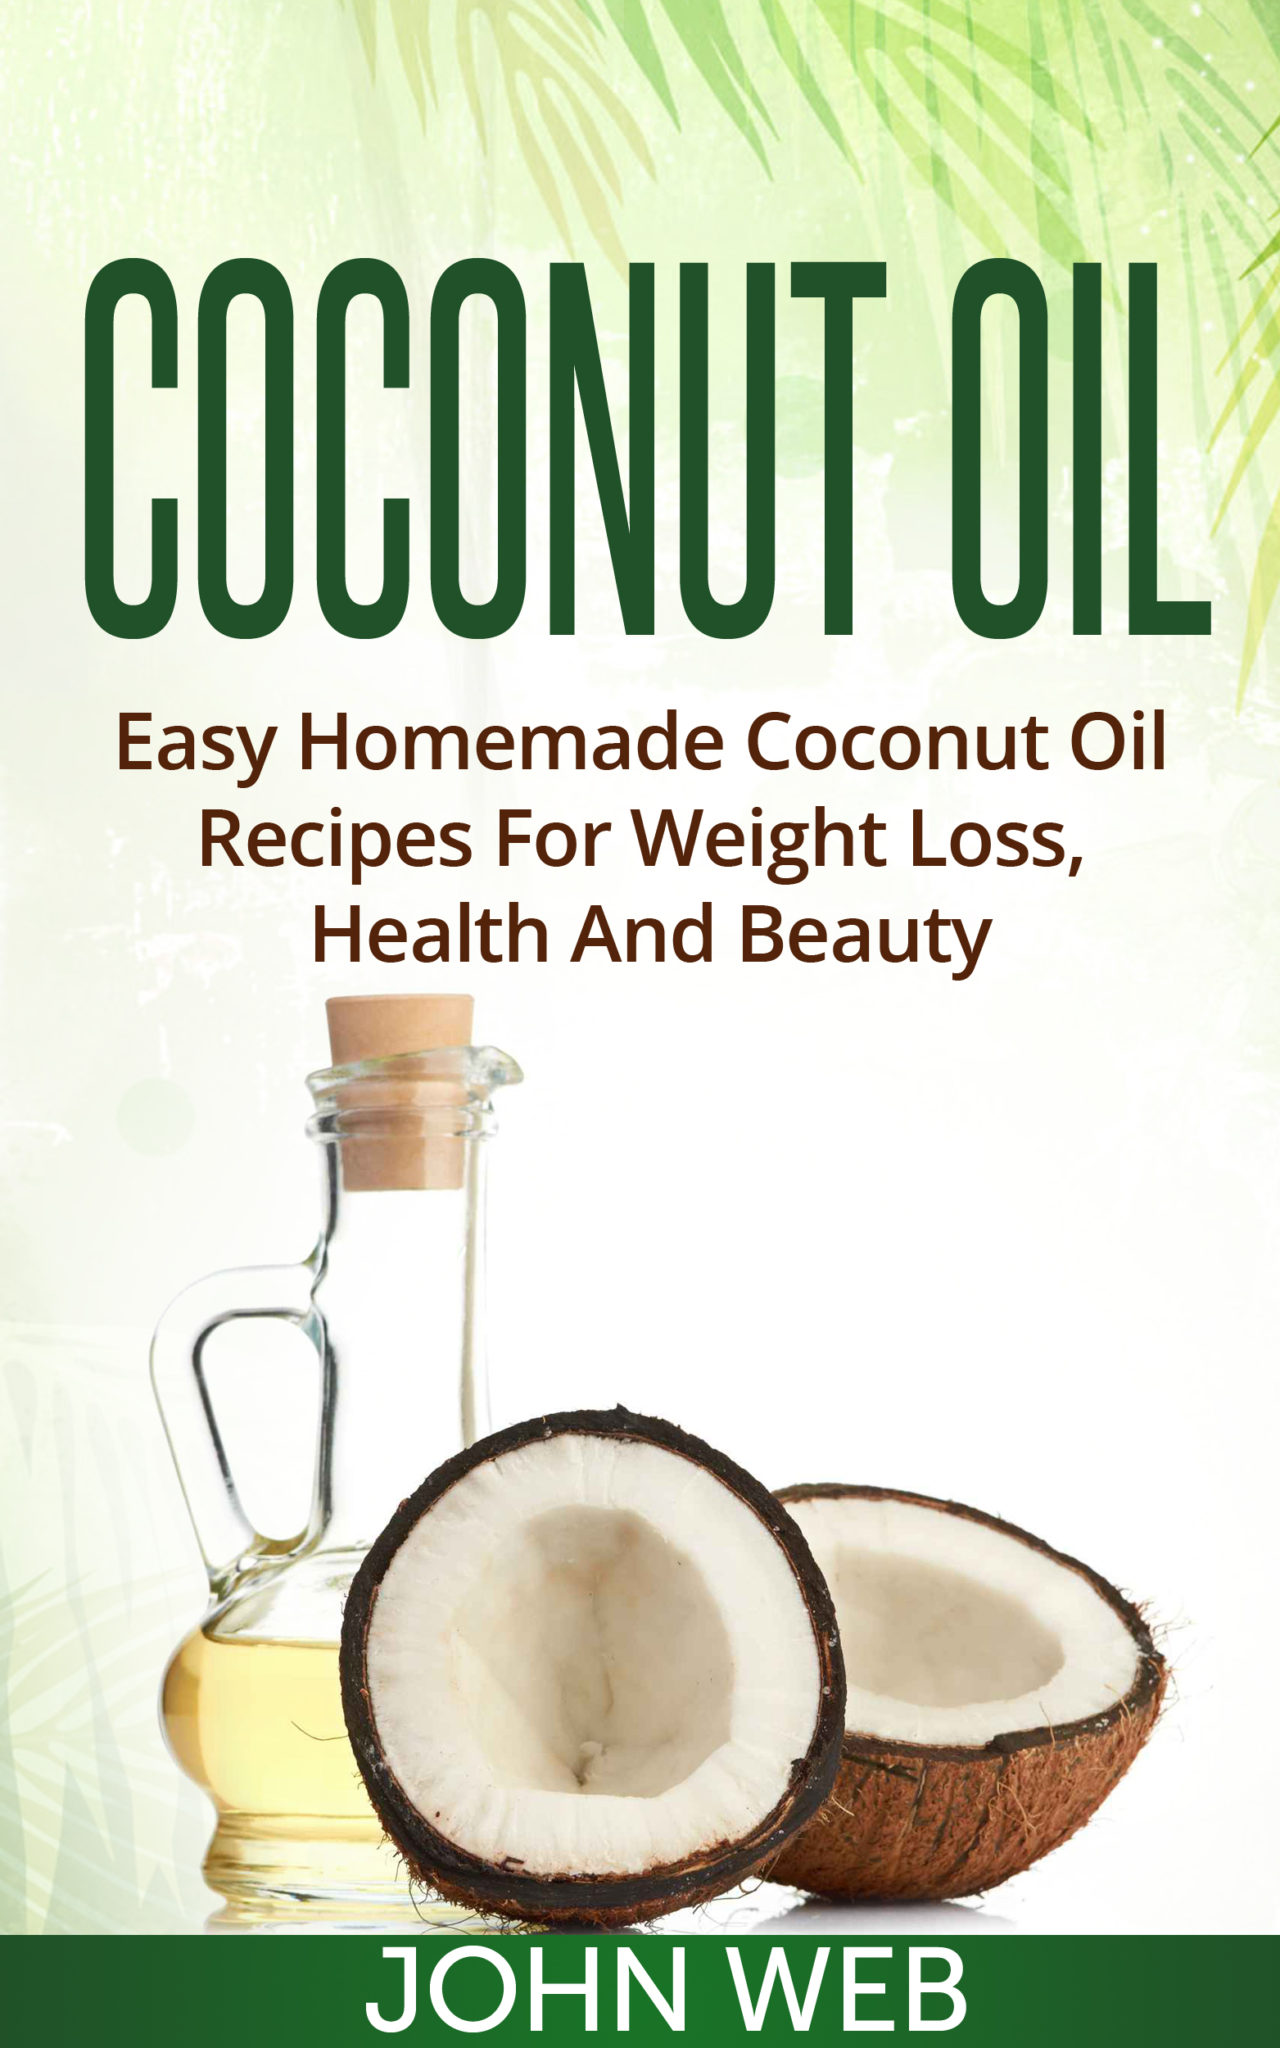 Coconut Oil – Easy Homemade Coconut Oil Recipes For Weight Loss, Health And Beauty by John Web